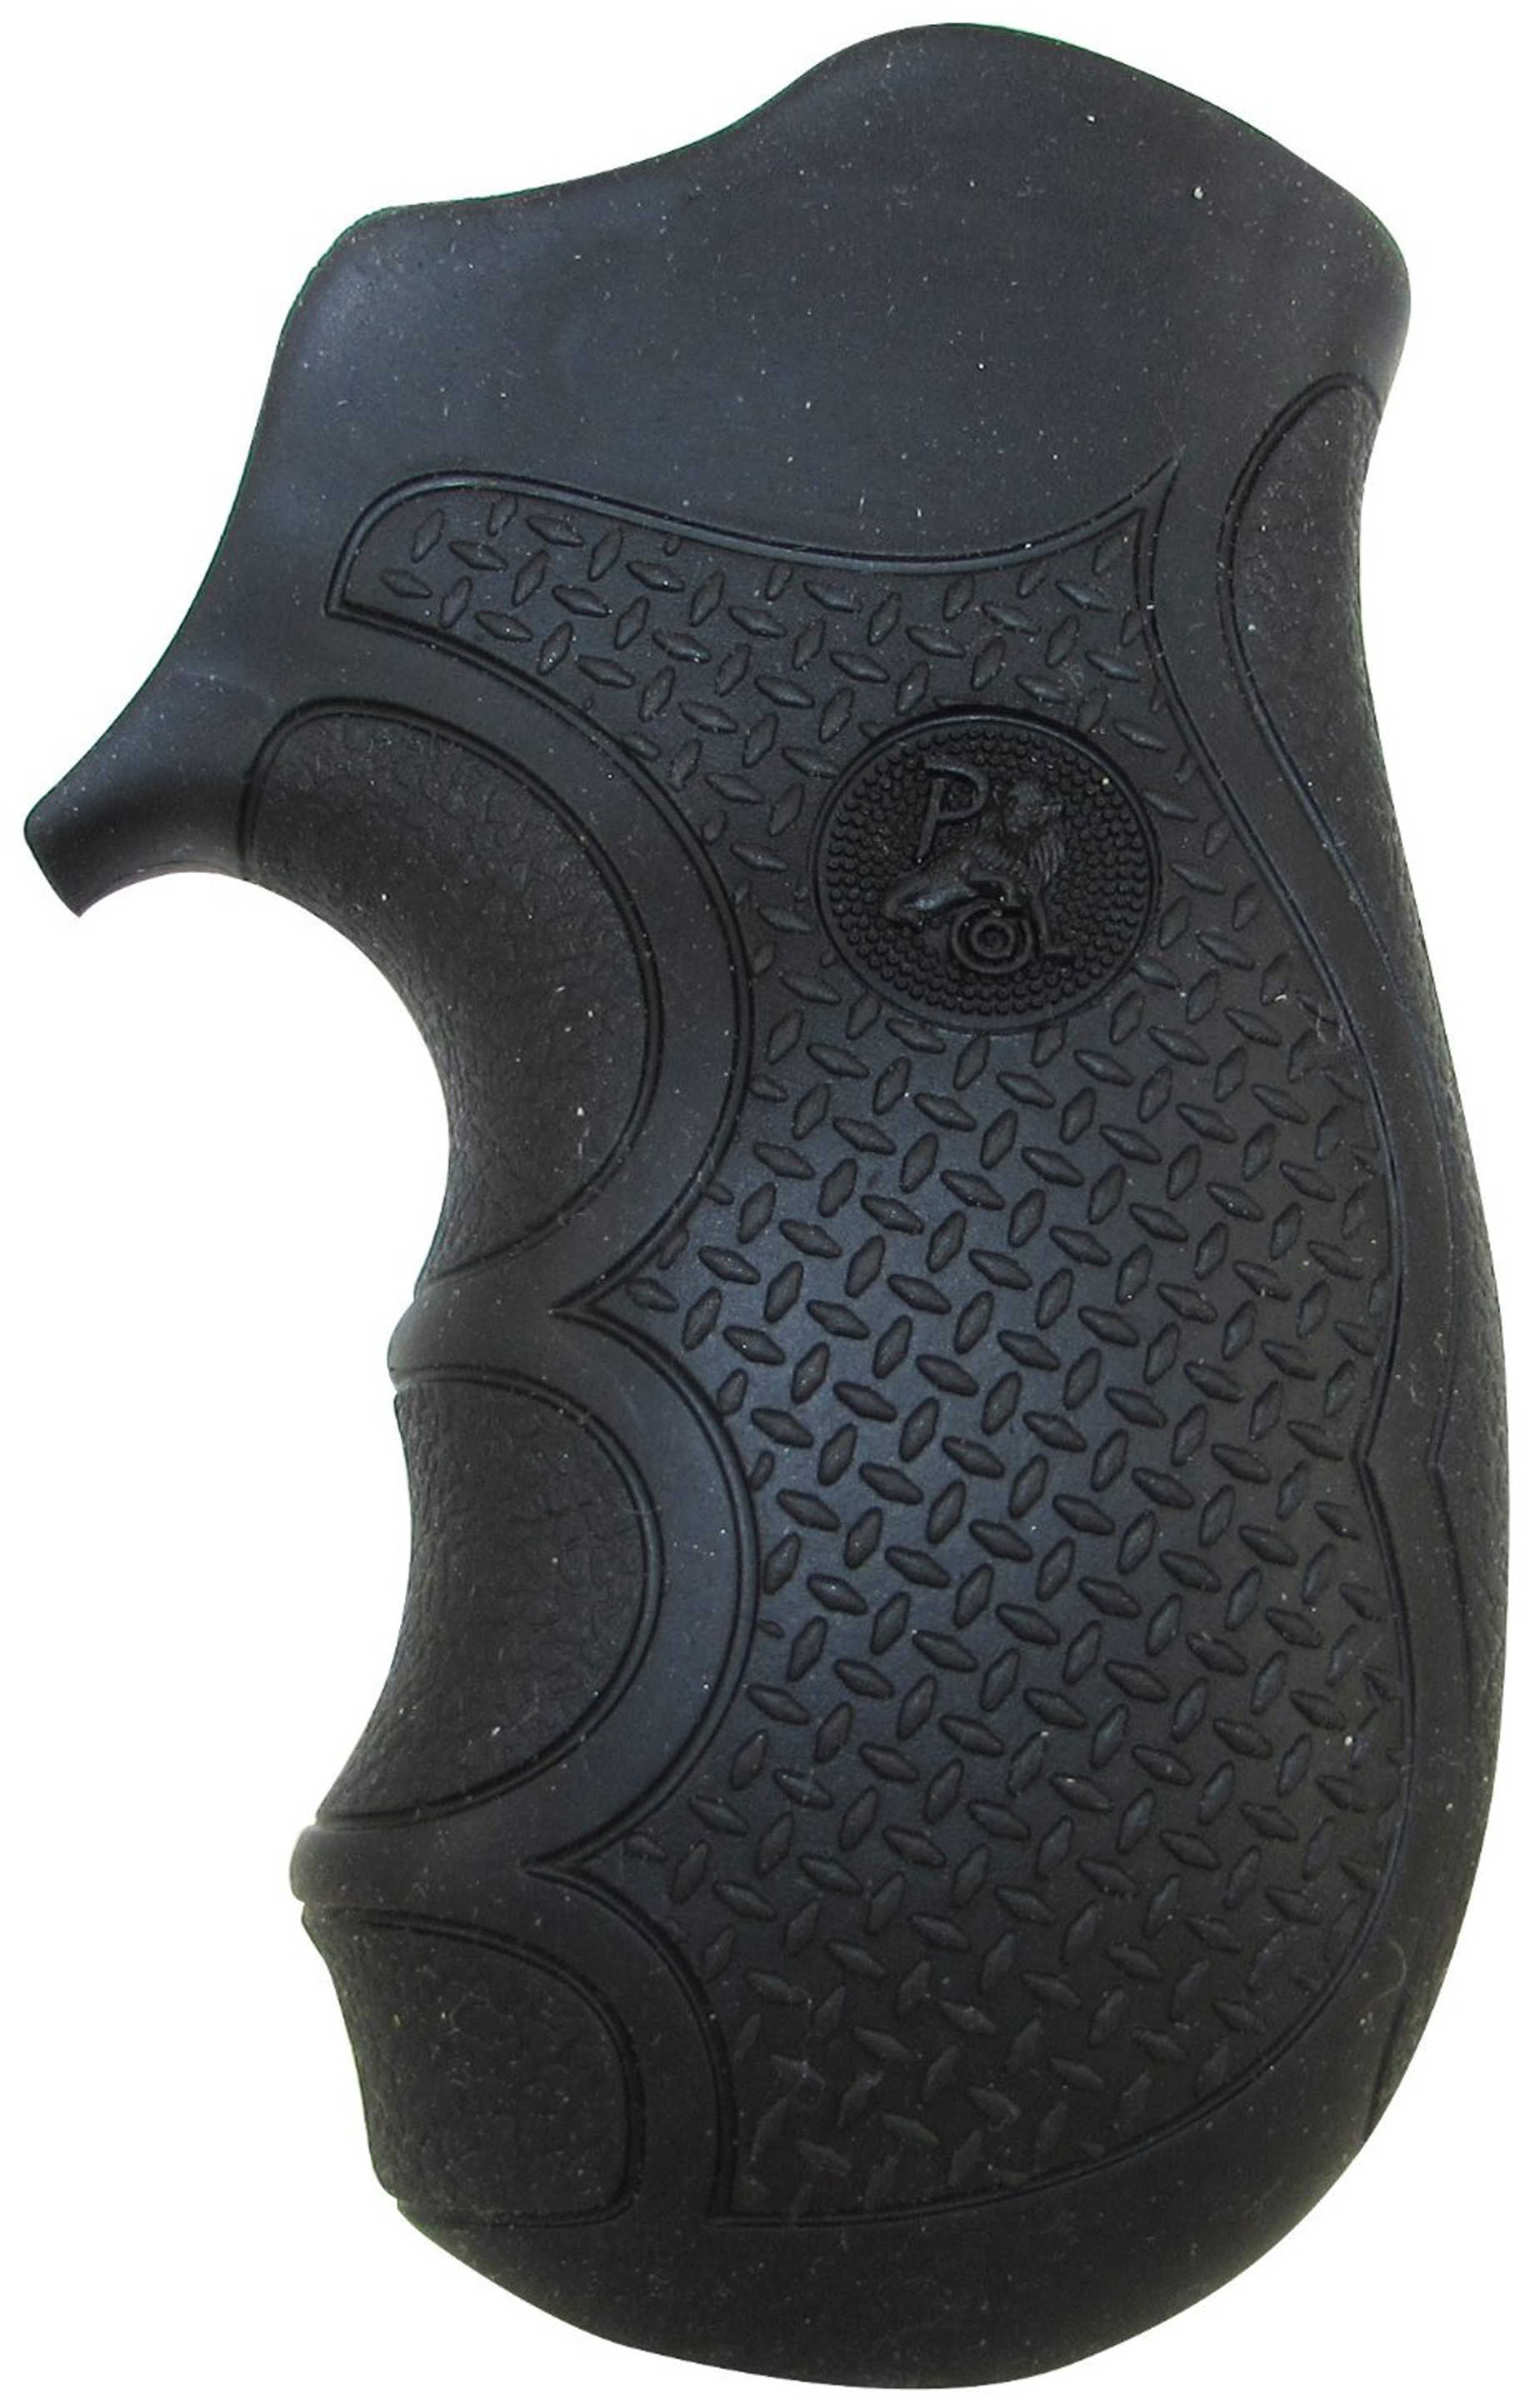 Pachmayr Diamond Pro Grip Ruger® LCR